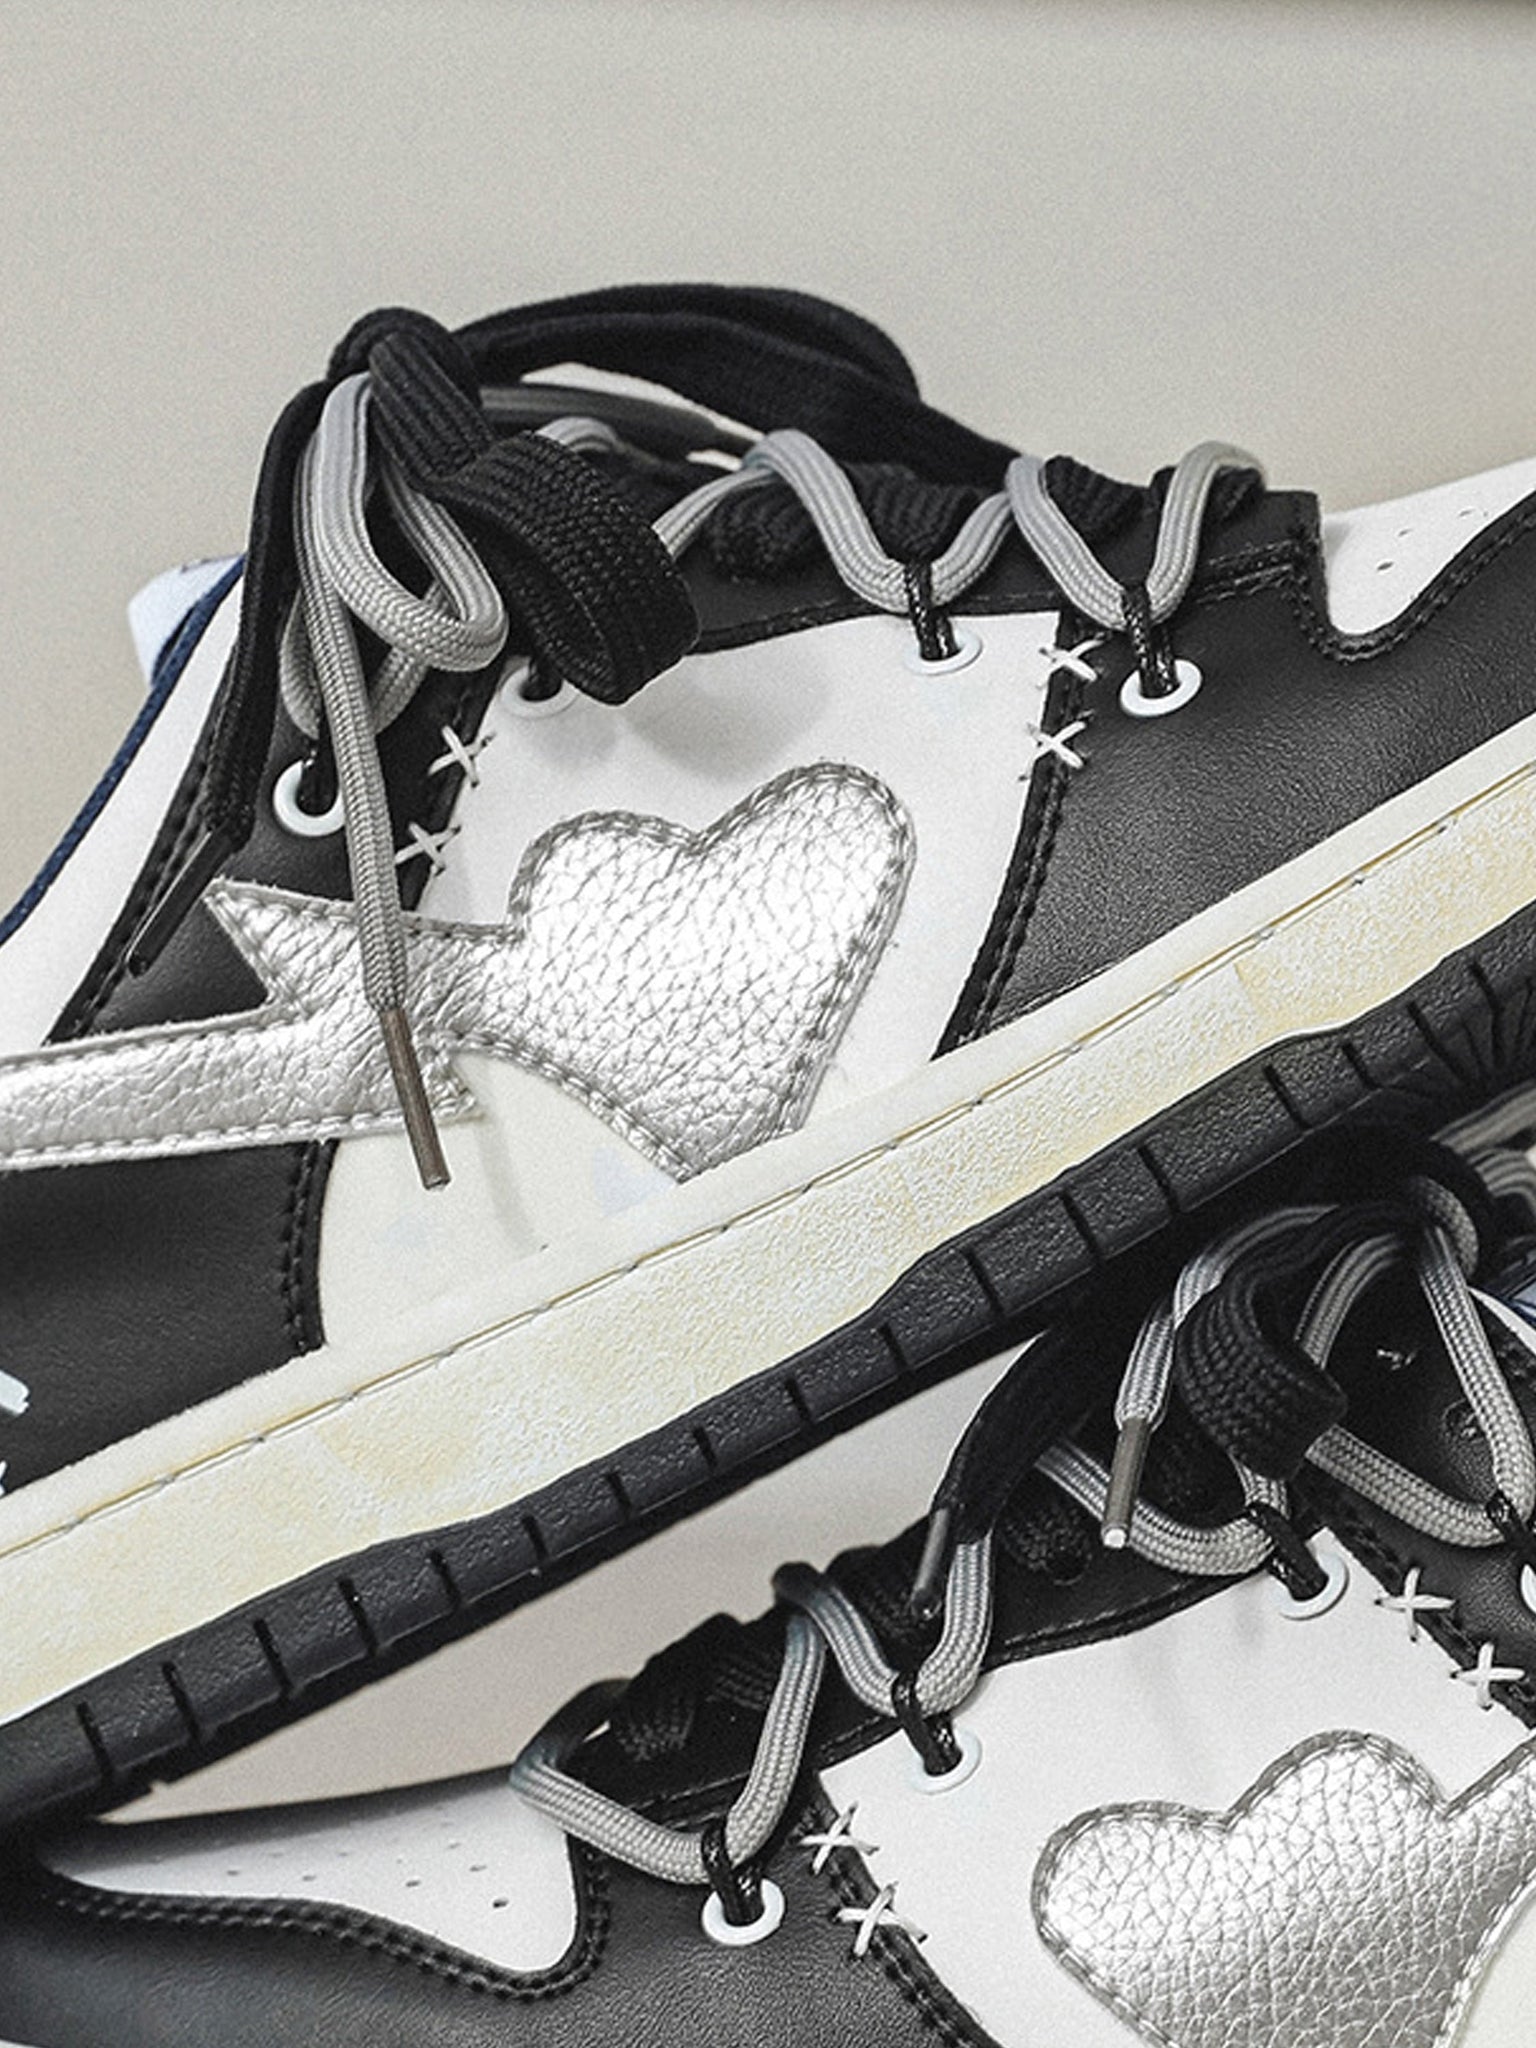 The Supermade High Street Love Sneakers